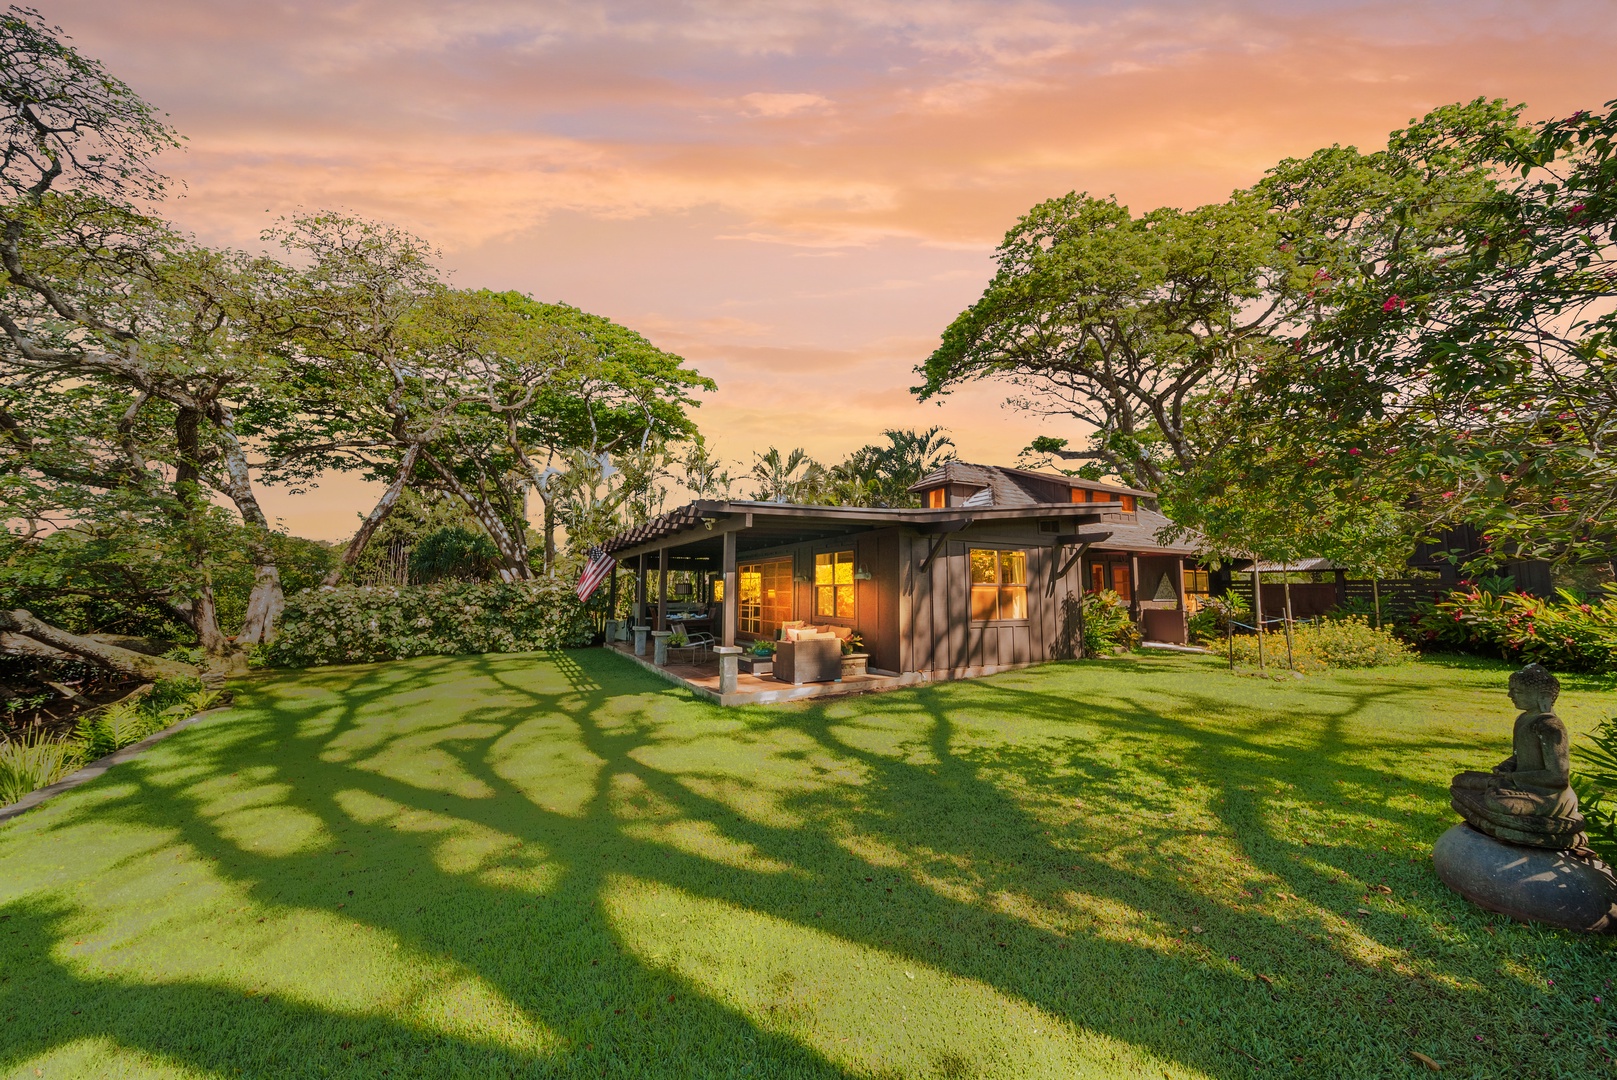 Haleiwa Vacation Rentals, Hale Anahulu - Hale Anahulu is private and secluded, perfect for a relaxing getaway